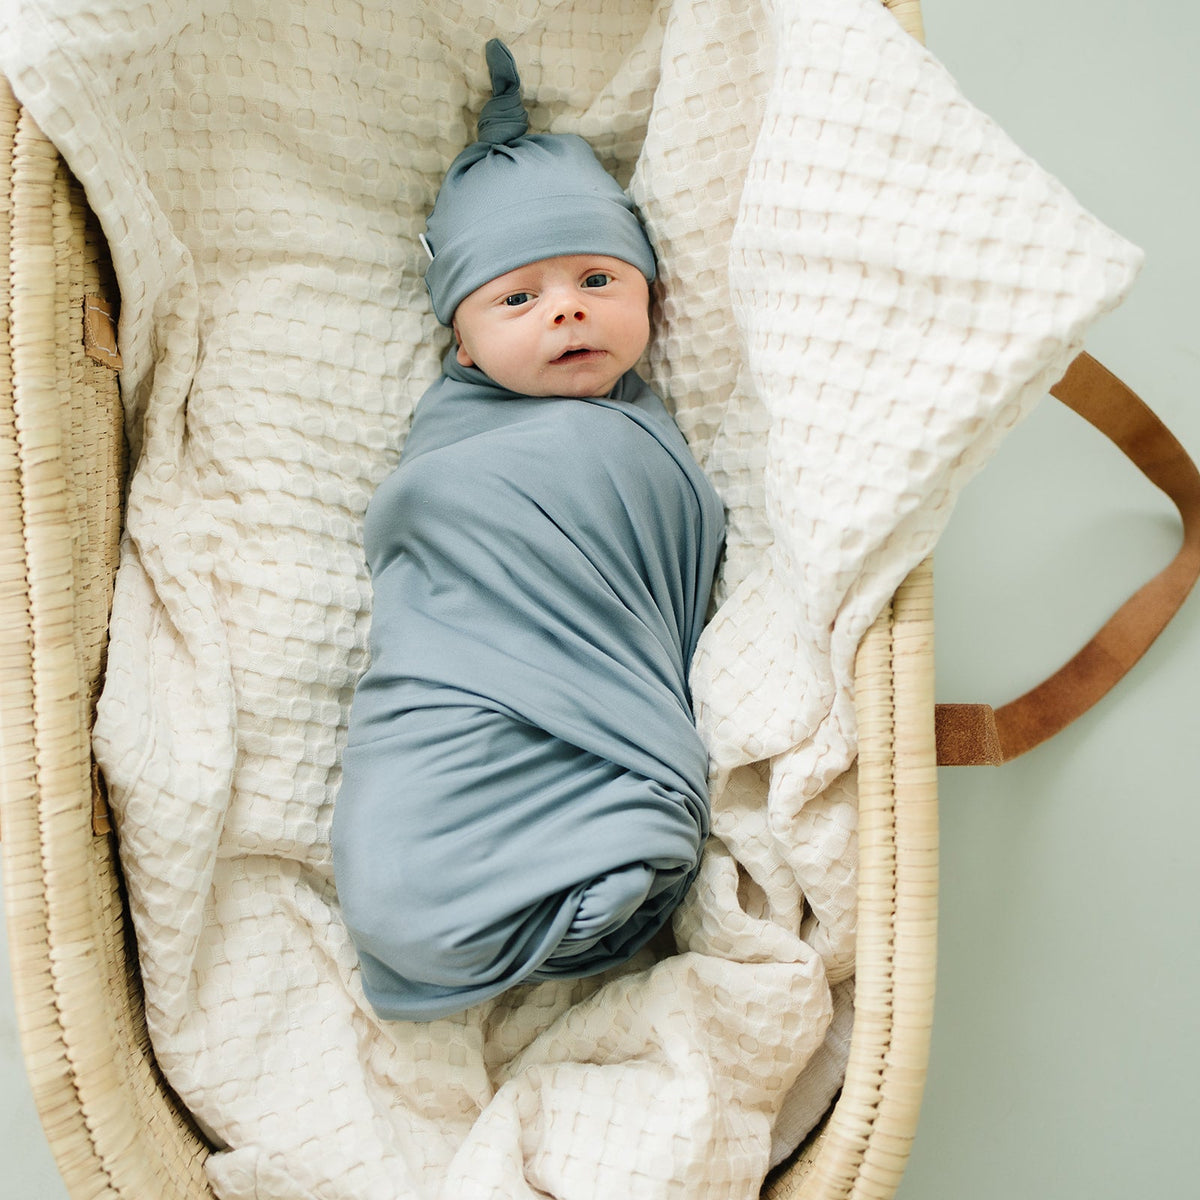 Dusty Blue Bamboo Stretch Swaddle Blanket